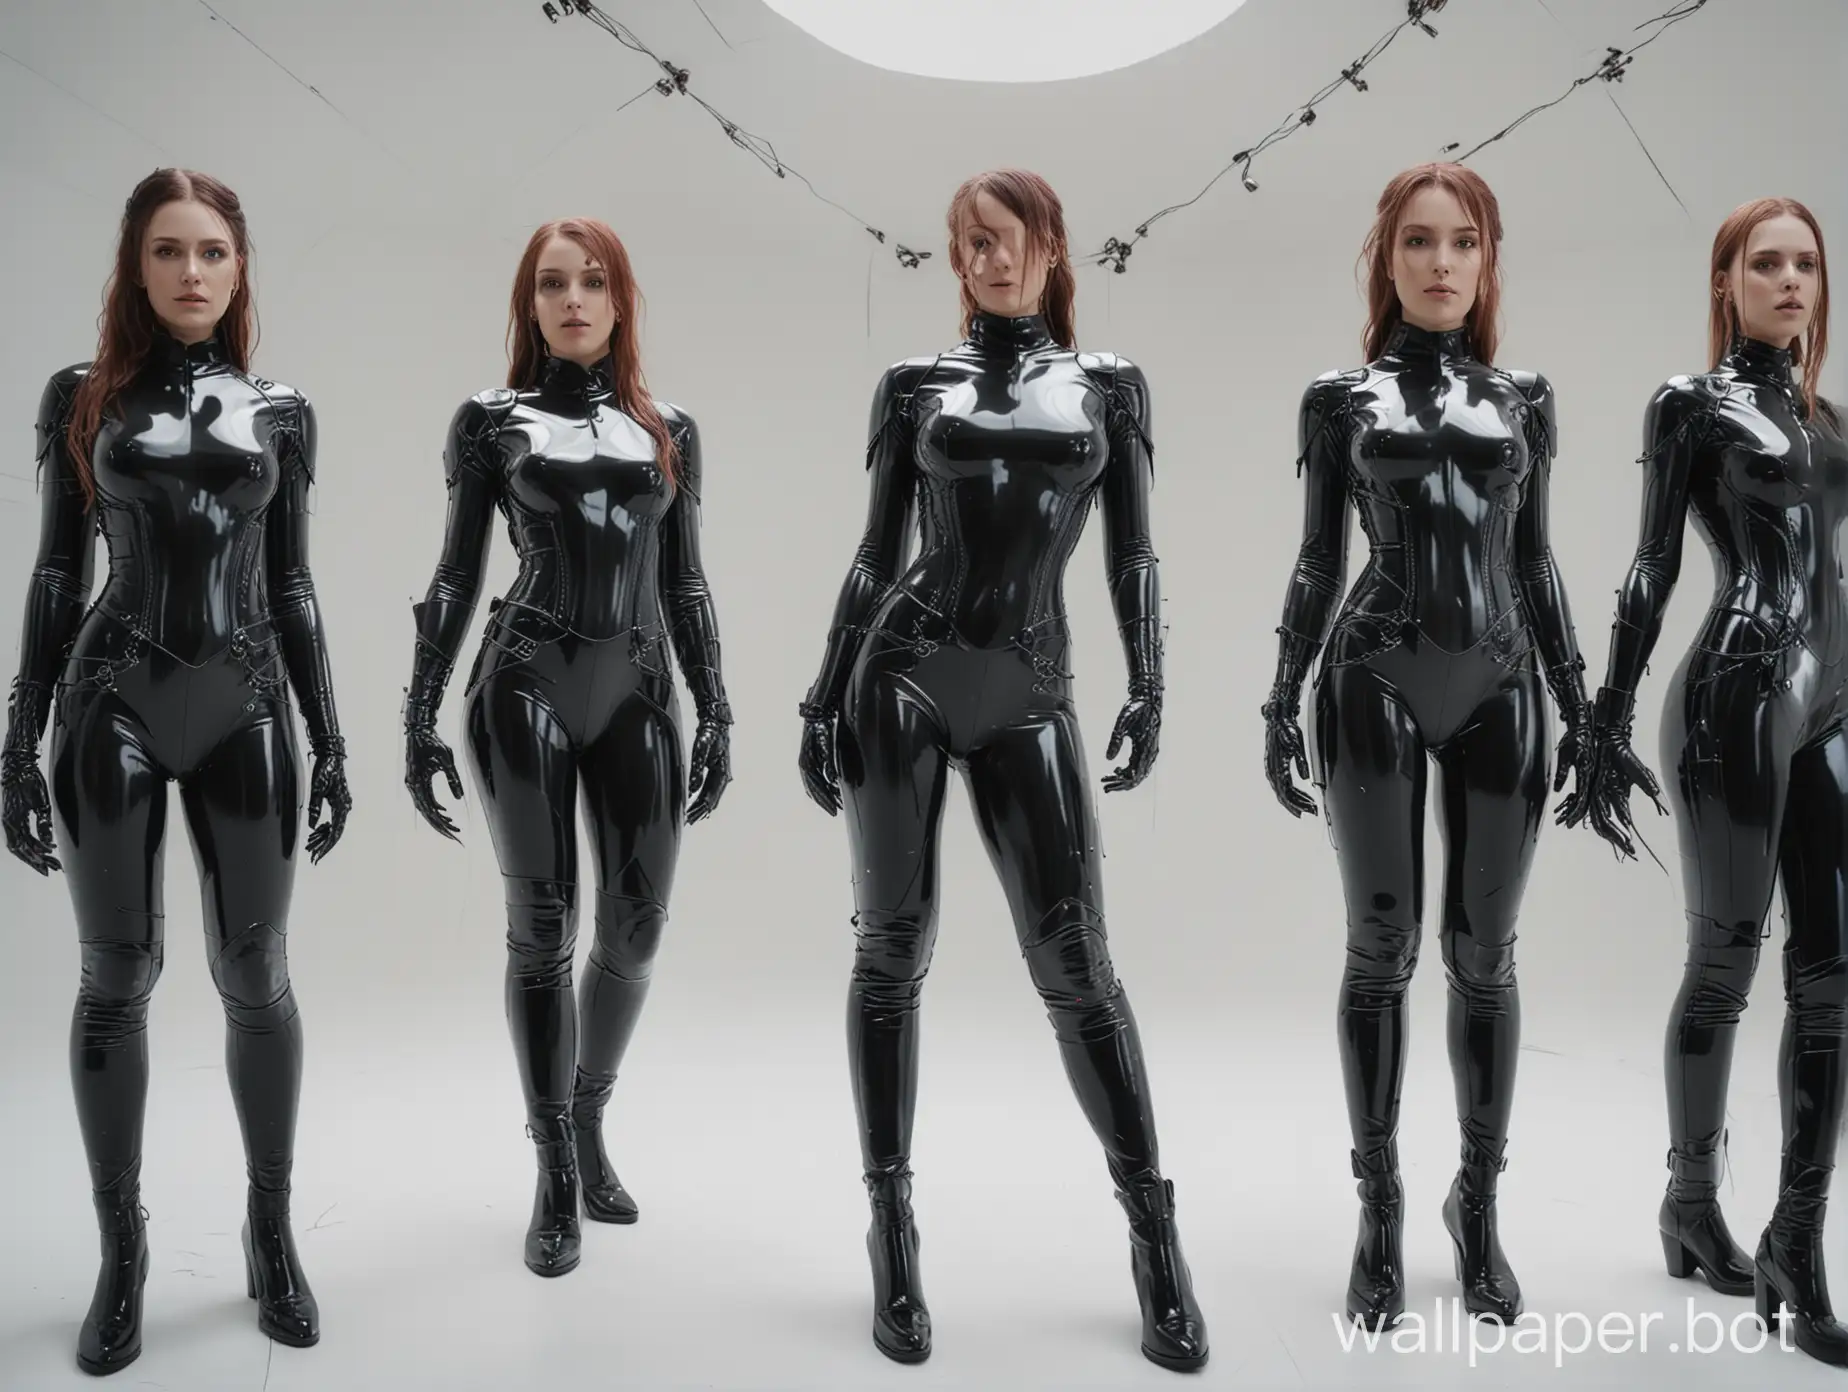 Latex-Catsuit-Models-Collide-with-Singularity-in-Gothcore-Multiverse